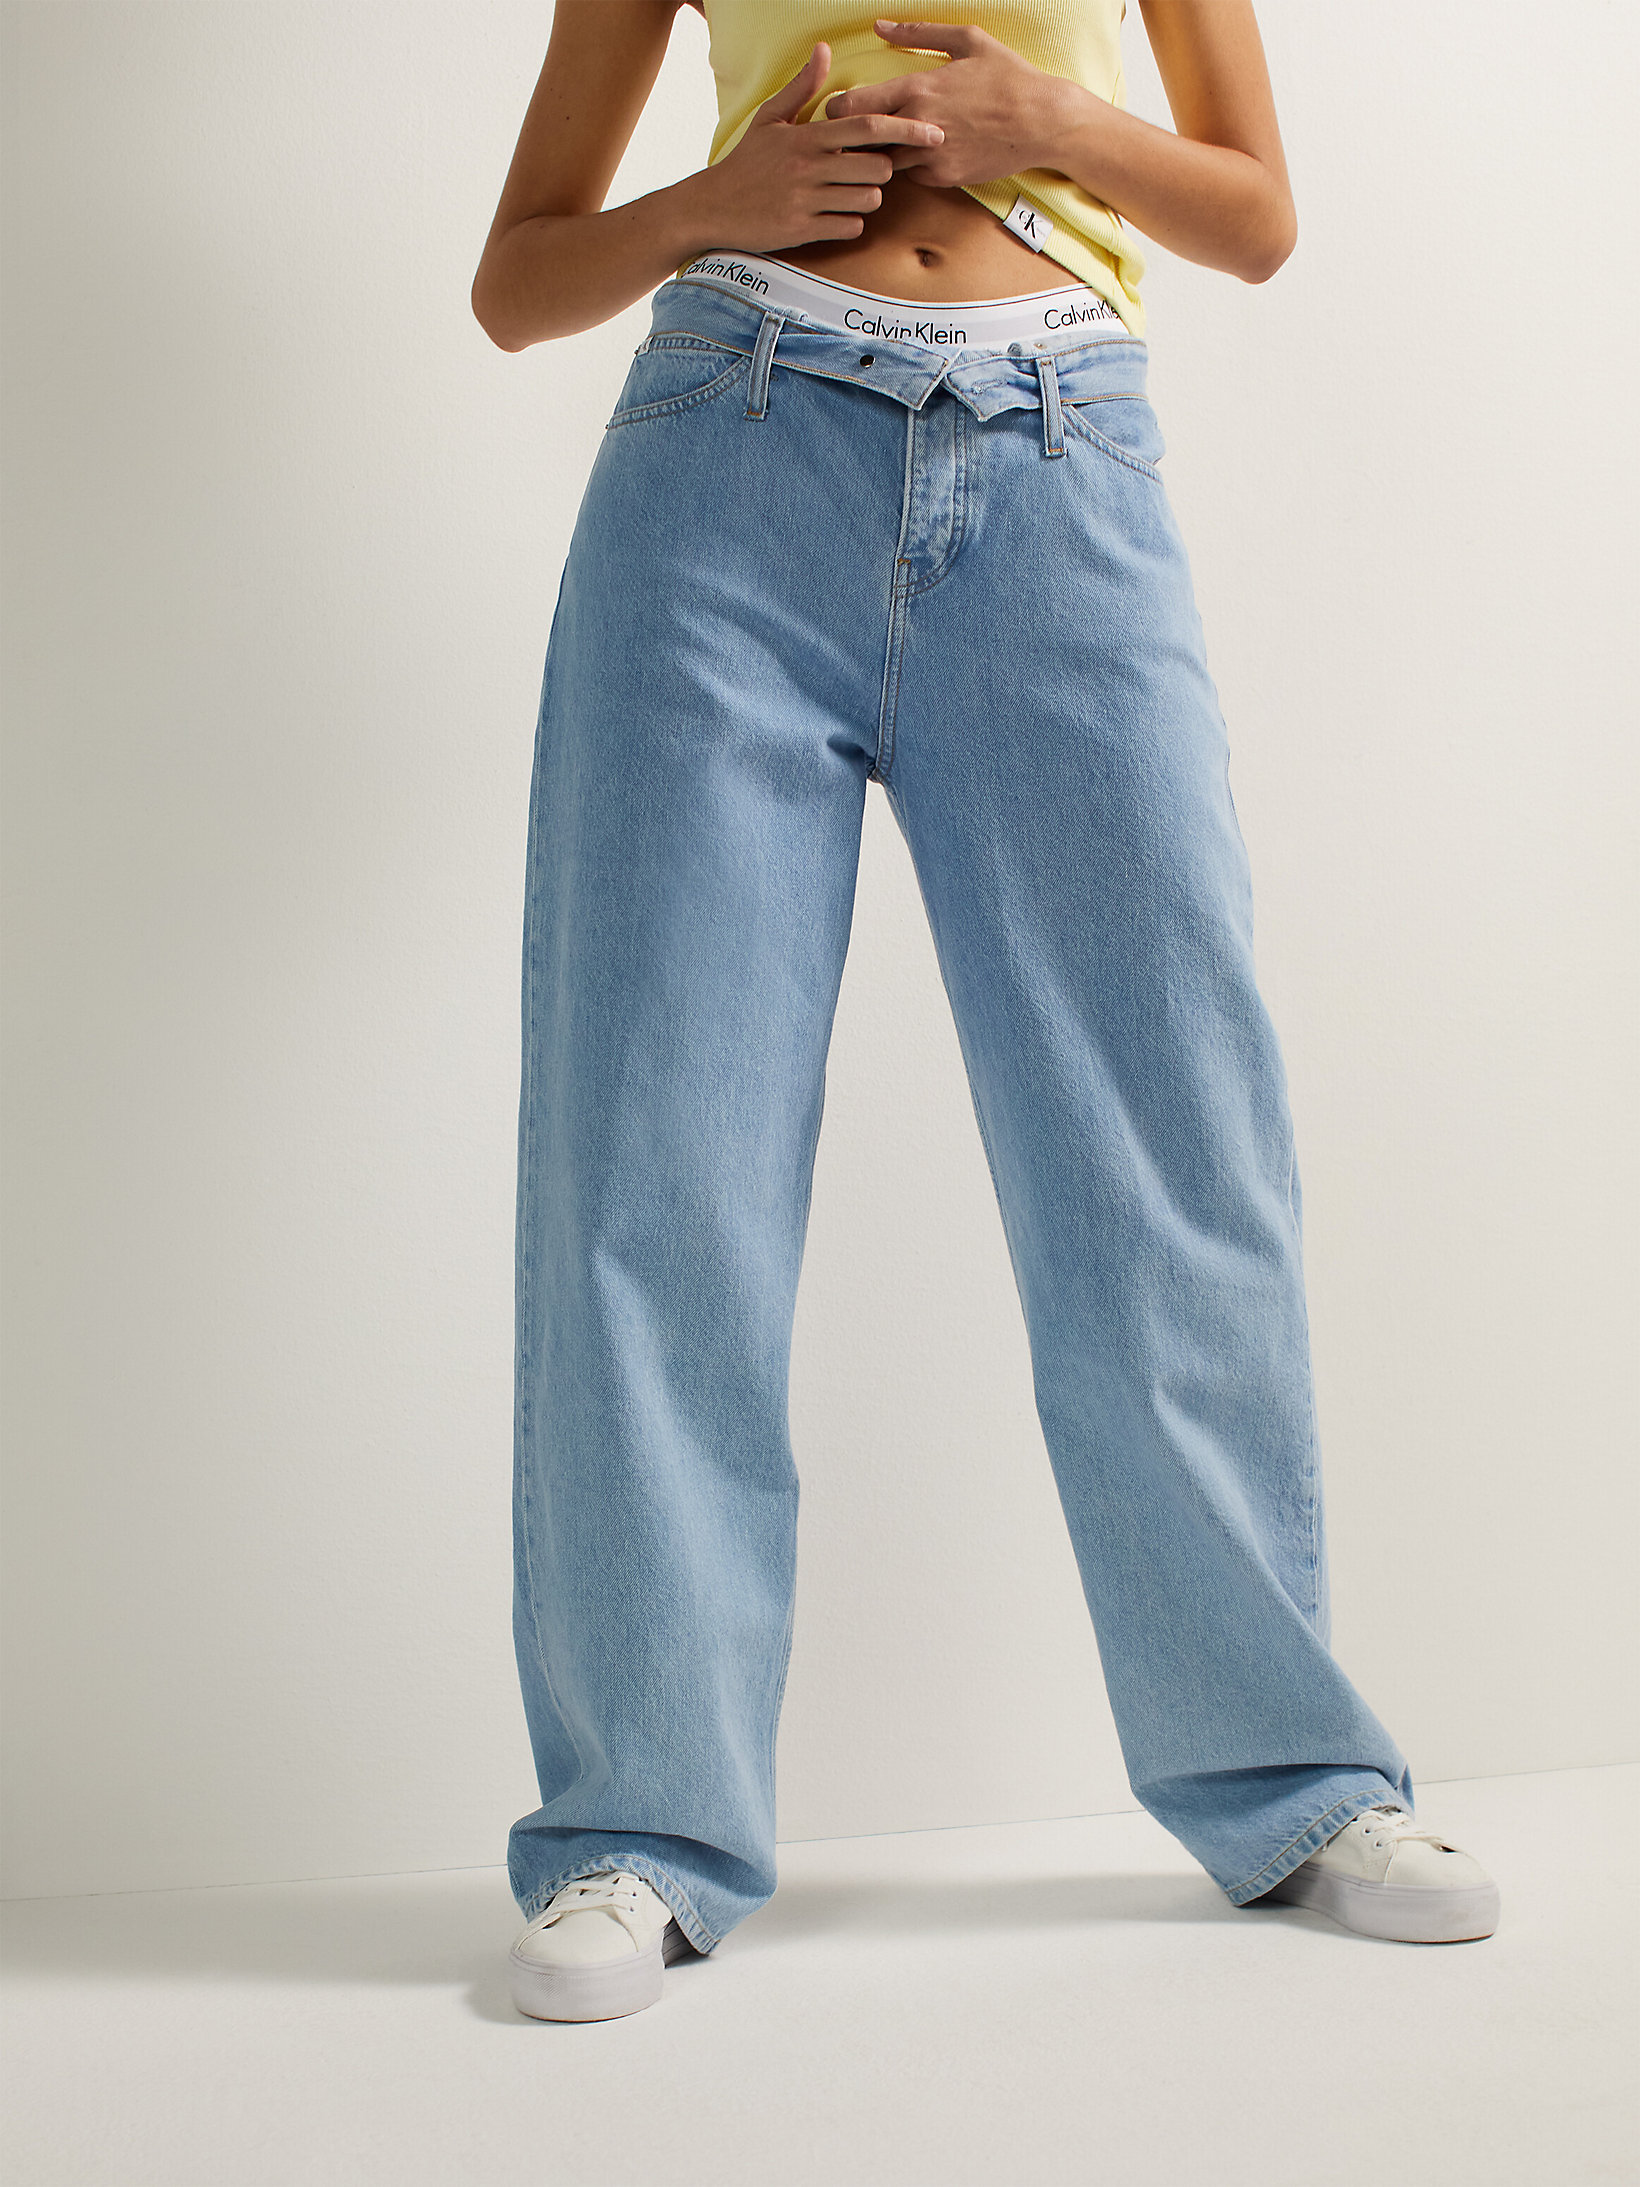 Denim Light High Rise Relaxed Jeans undefined donna Calvin Klein